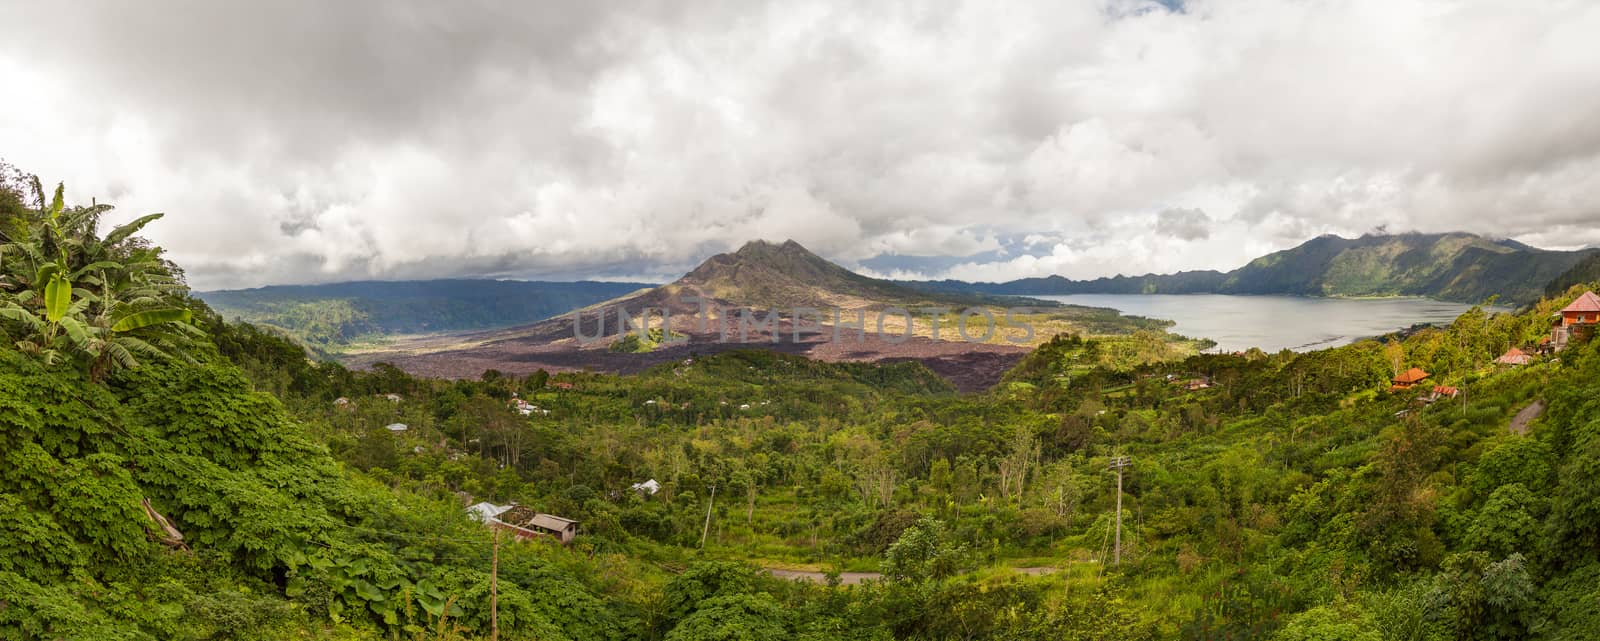 Volcano Batur, panorama view from Kintamani. Volcano landscape view with forest in cloudy day of winter rainy season. Bali, Indonesia by aksenovko